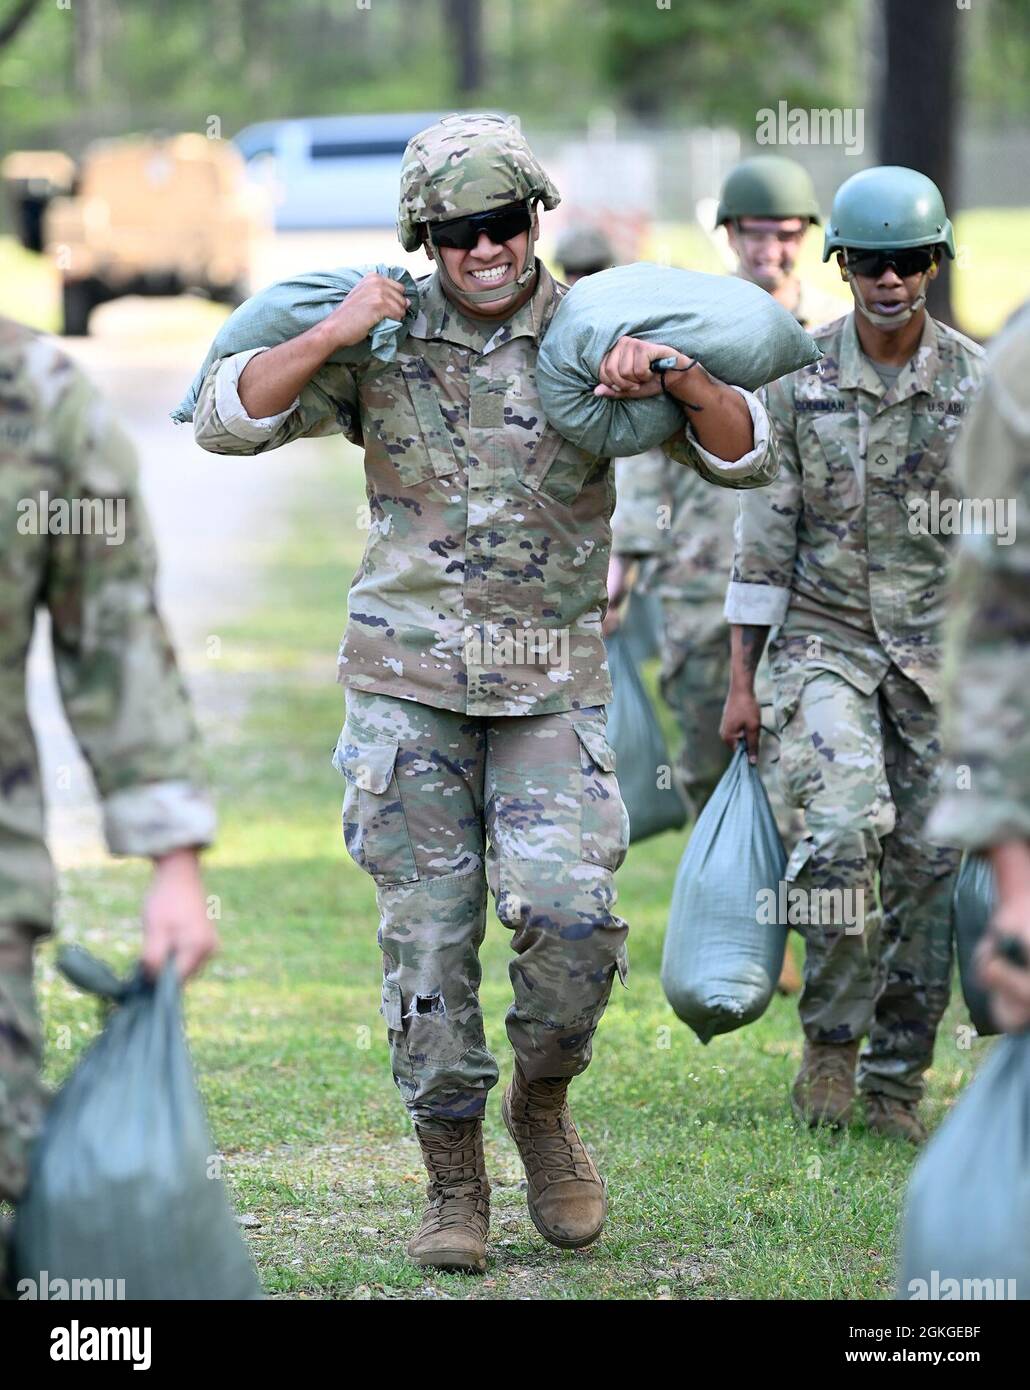 Soldiers from Support Battalion, 1st Special Warfare Training Group (Airborne) carry sandbags as part of a stress-shoot during the battalion's Commander's Cup competition at Fort Bragg, North Carolina April 15, 2021. The Soldiers from each company competed in a ruck march, obstacle course, land navigation, Jeopardy-themed trivia contest and stress shoot with pistols and rifles. Stock Photo